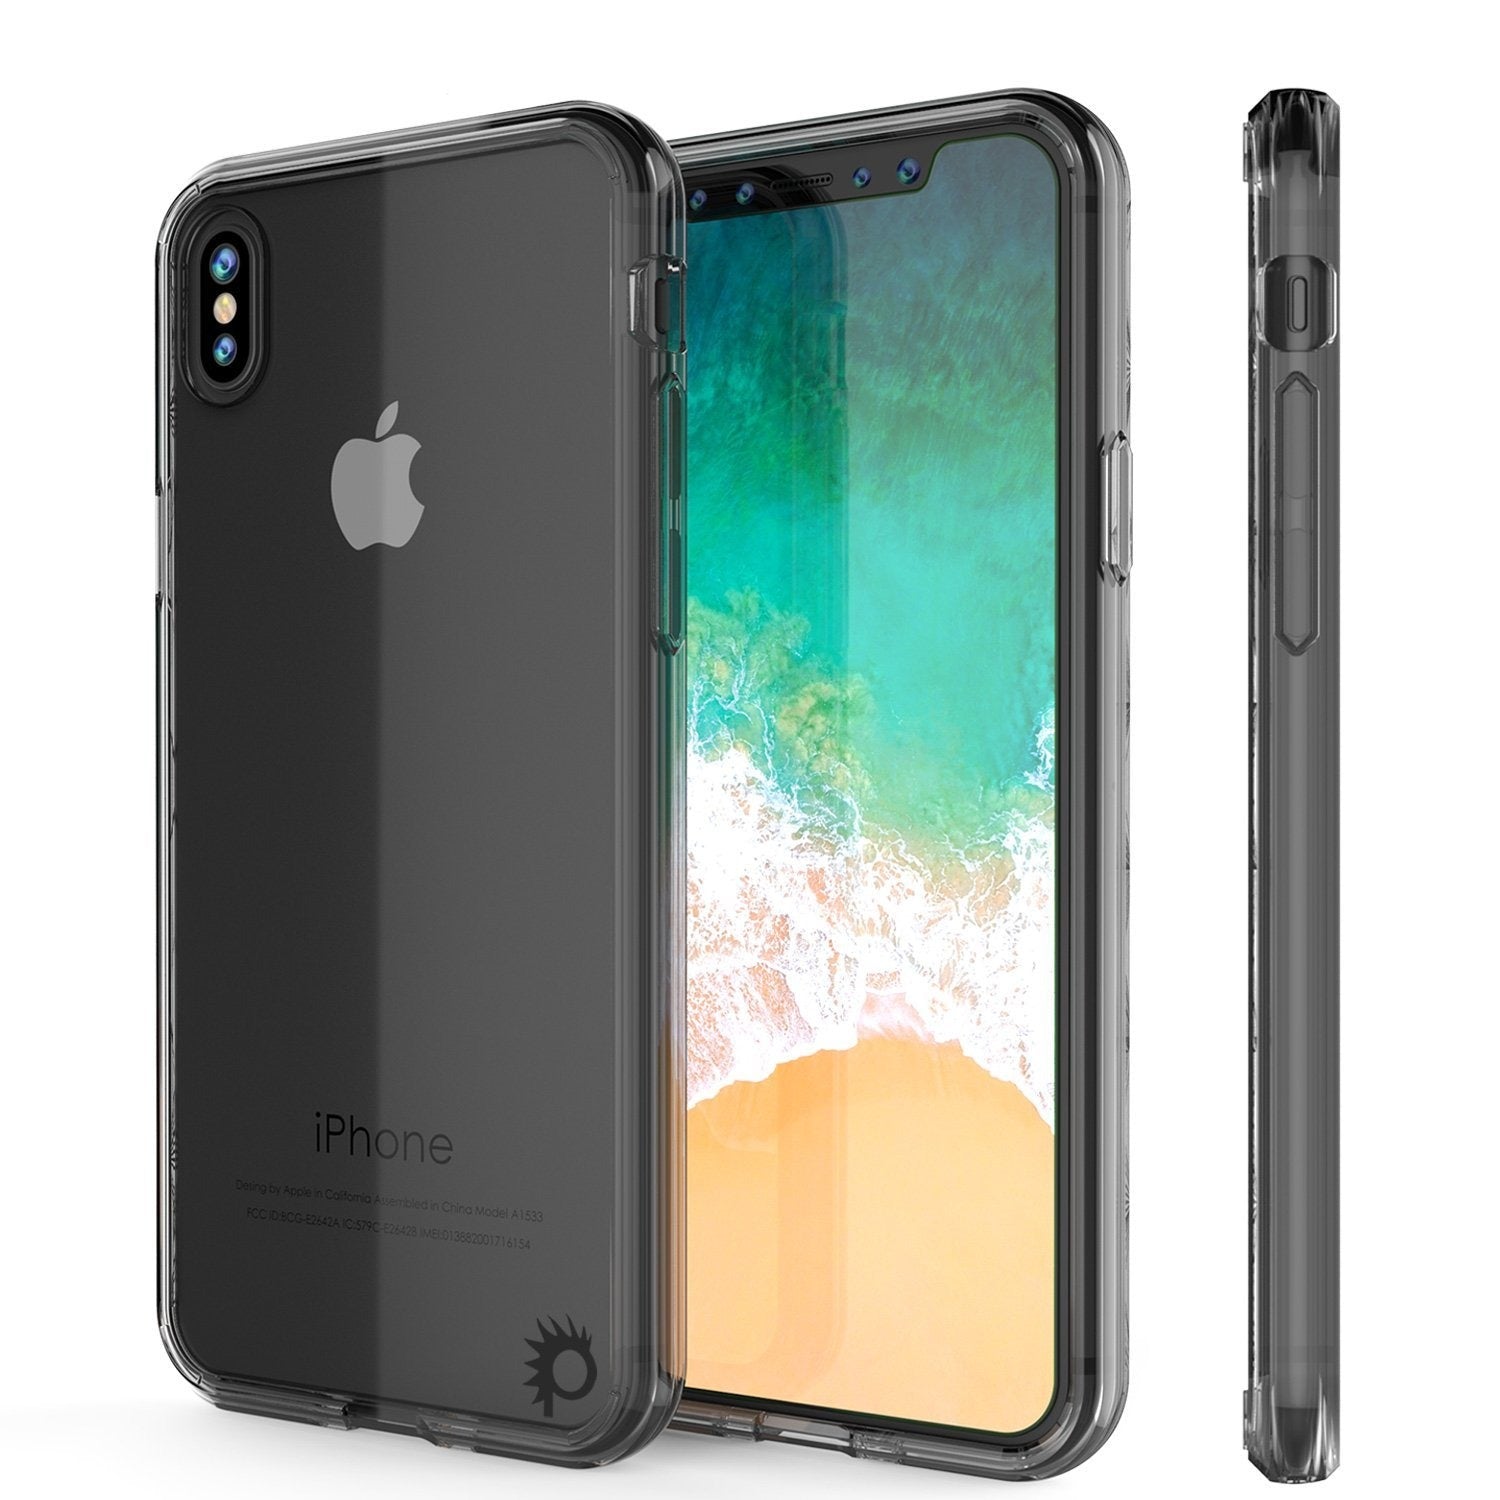 iPhone X Case, PUNKcase [LUCID 2.0 Series] [Slim Fit] Armor Cover W/Integrated Anti-Shock System [Crystal Black] - PunkCase NZ